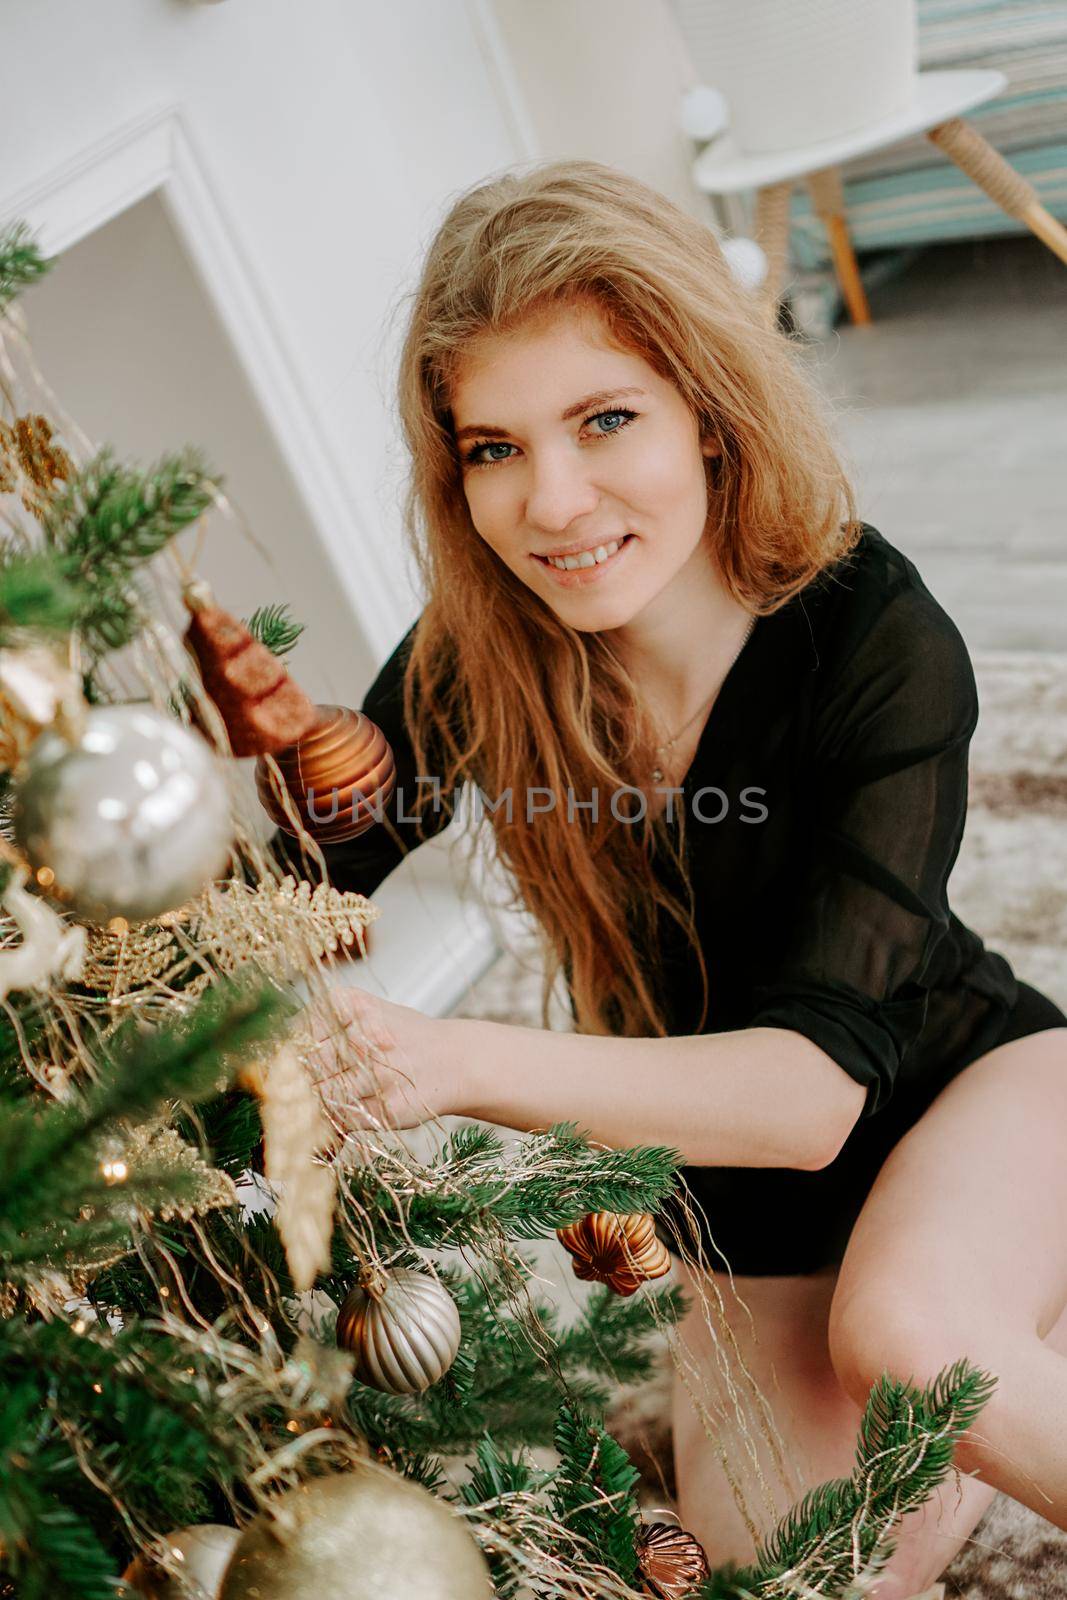 Beautiful young woman decorating a Christmas tree - soft colors preset